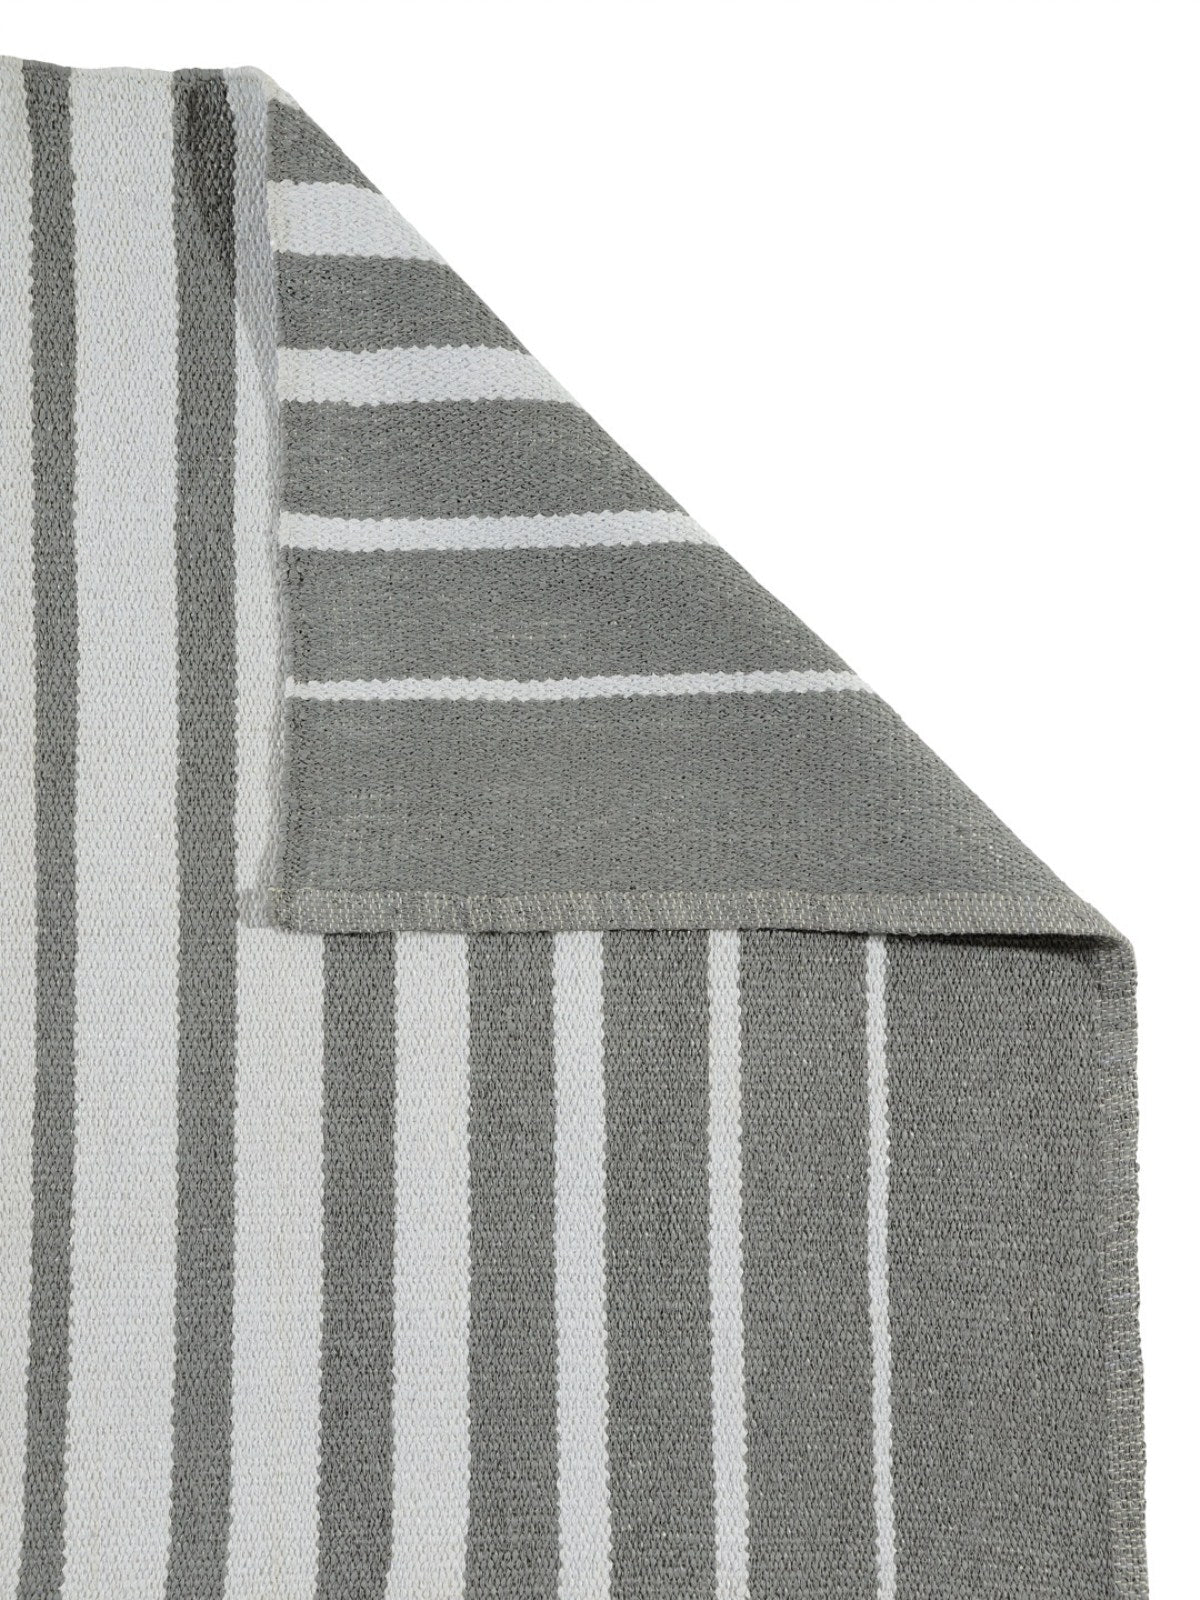 Grey & White 3 ft x 5 ft Stripes Patterned Dhurrie